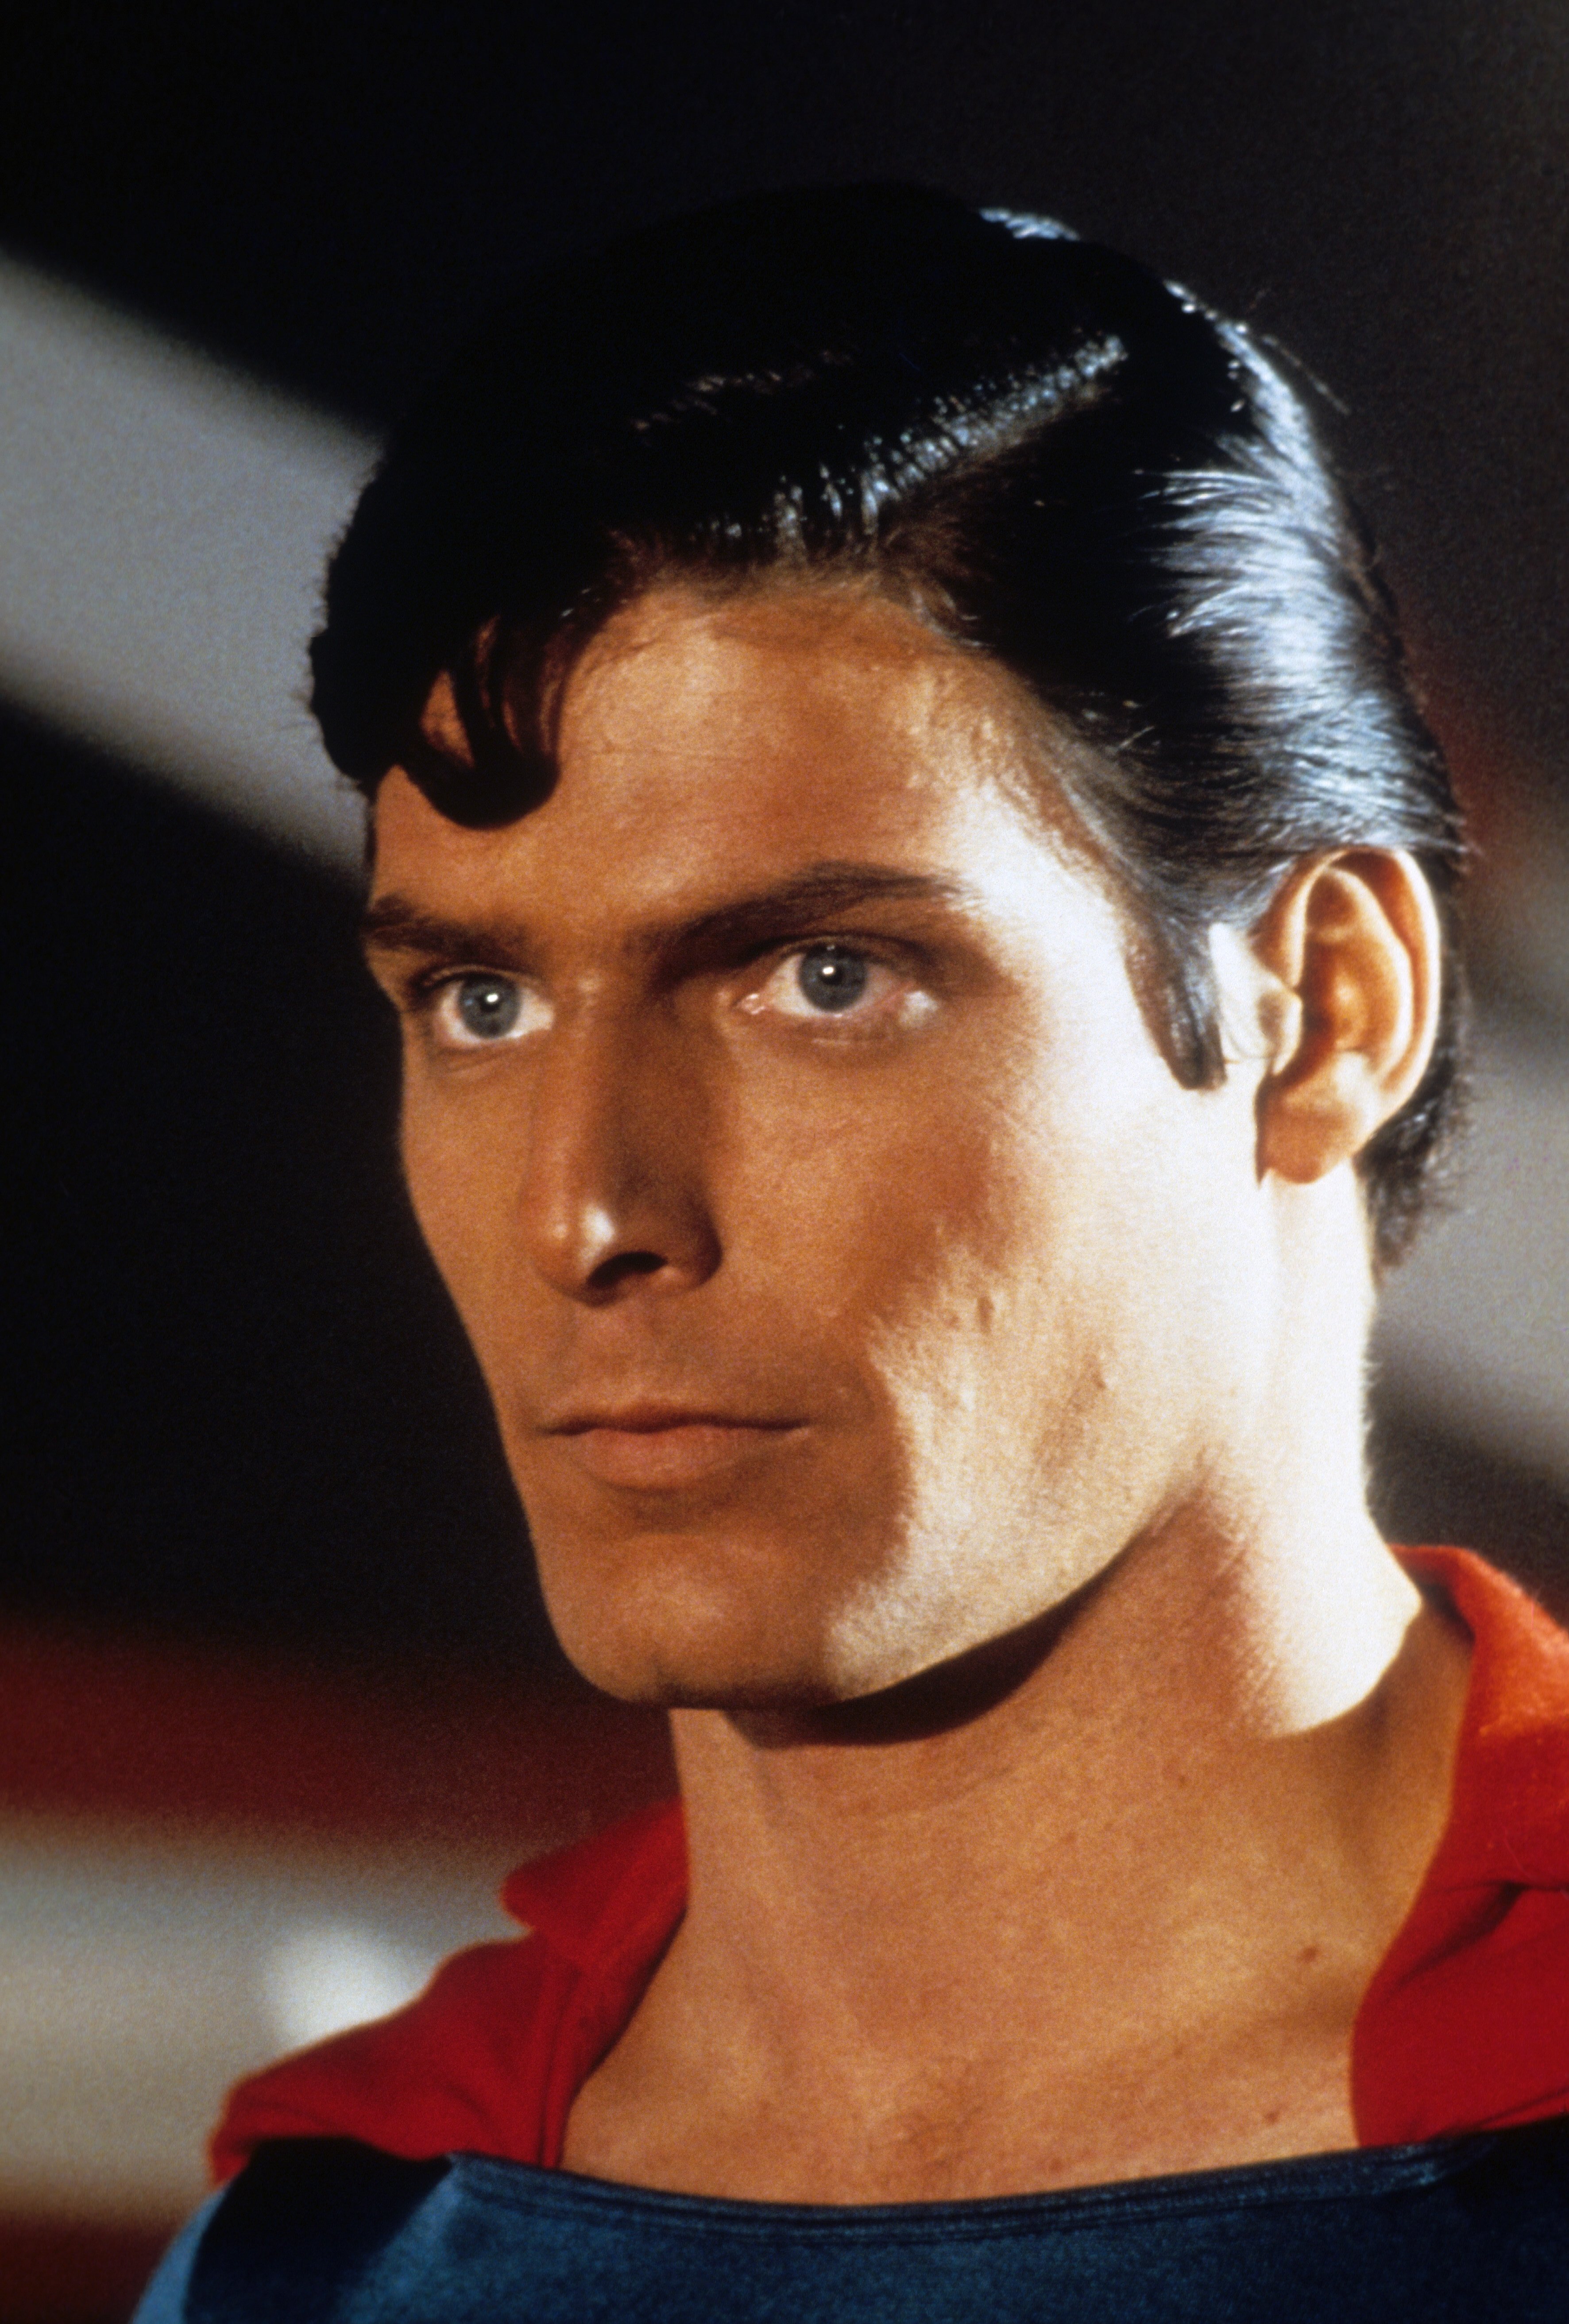 A headshot Christopher Reeve as Superman in a scene from the film, "Superman," in 1978. / Source: Getty Images